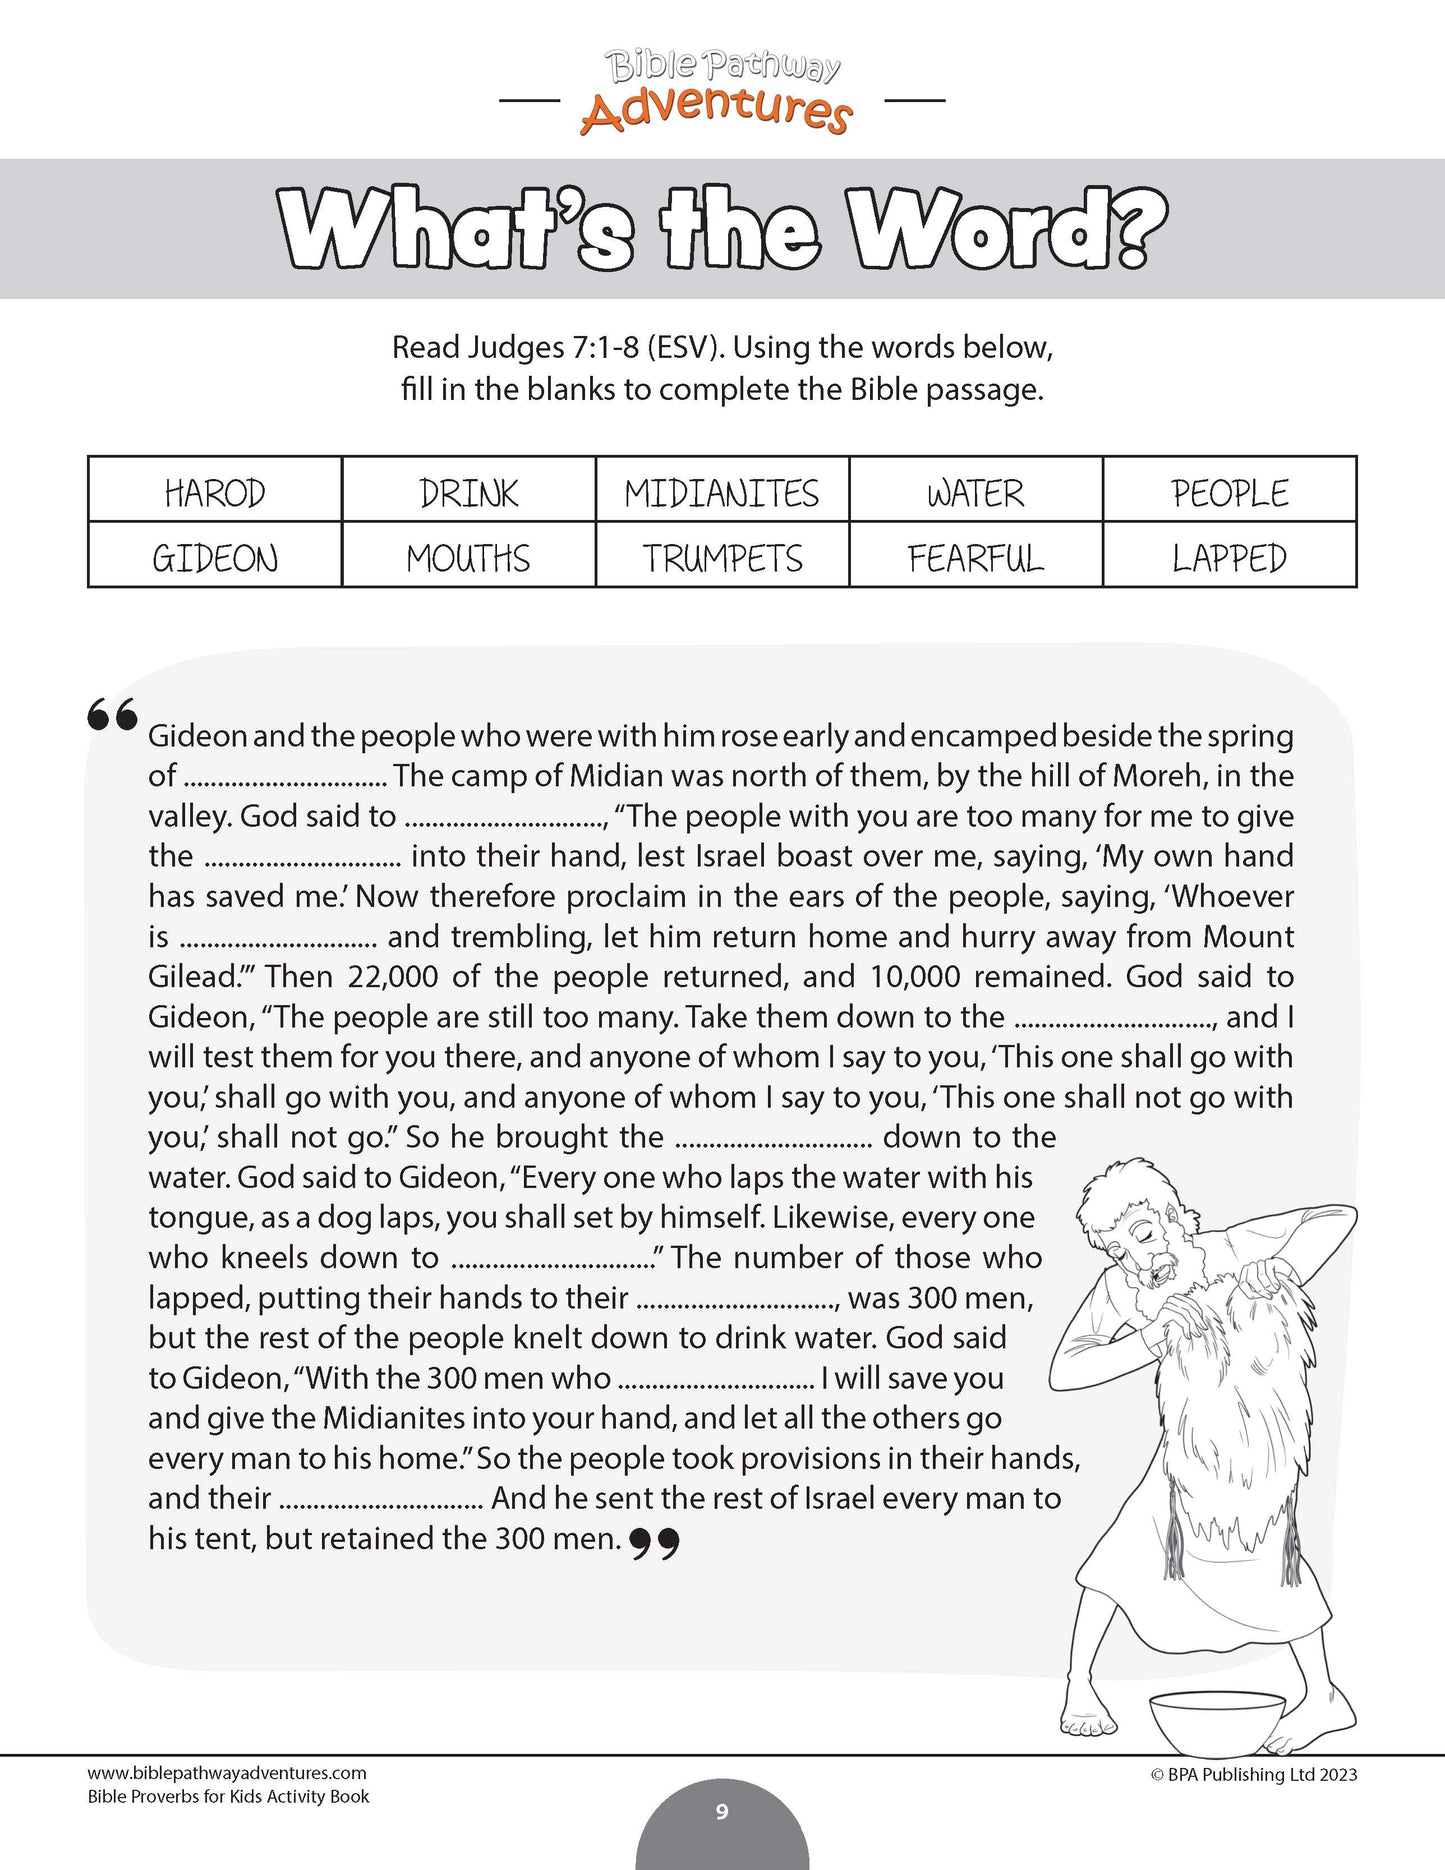 Courage: Bible Activity Book for Kids (PDF)